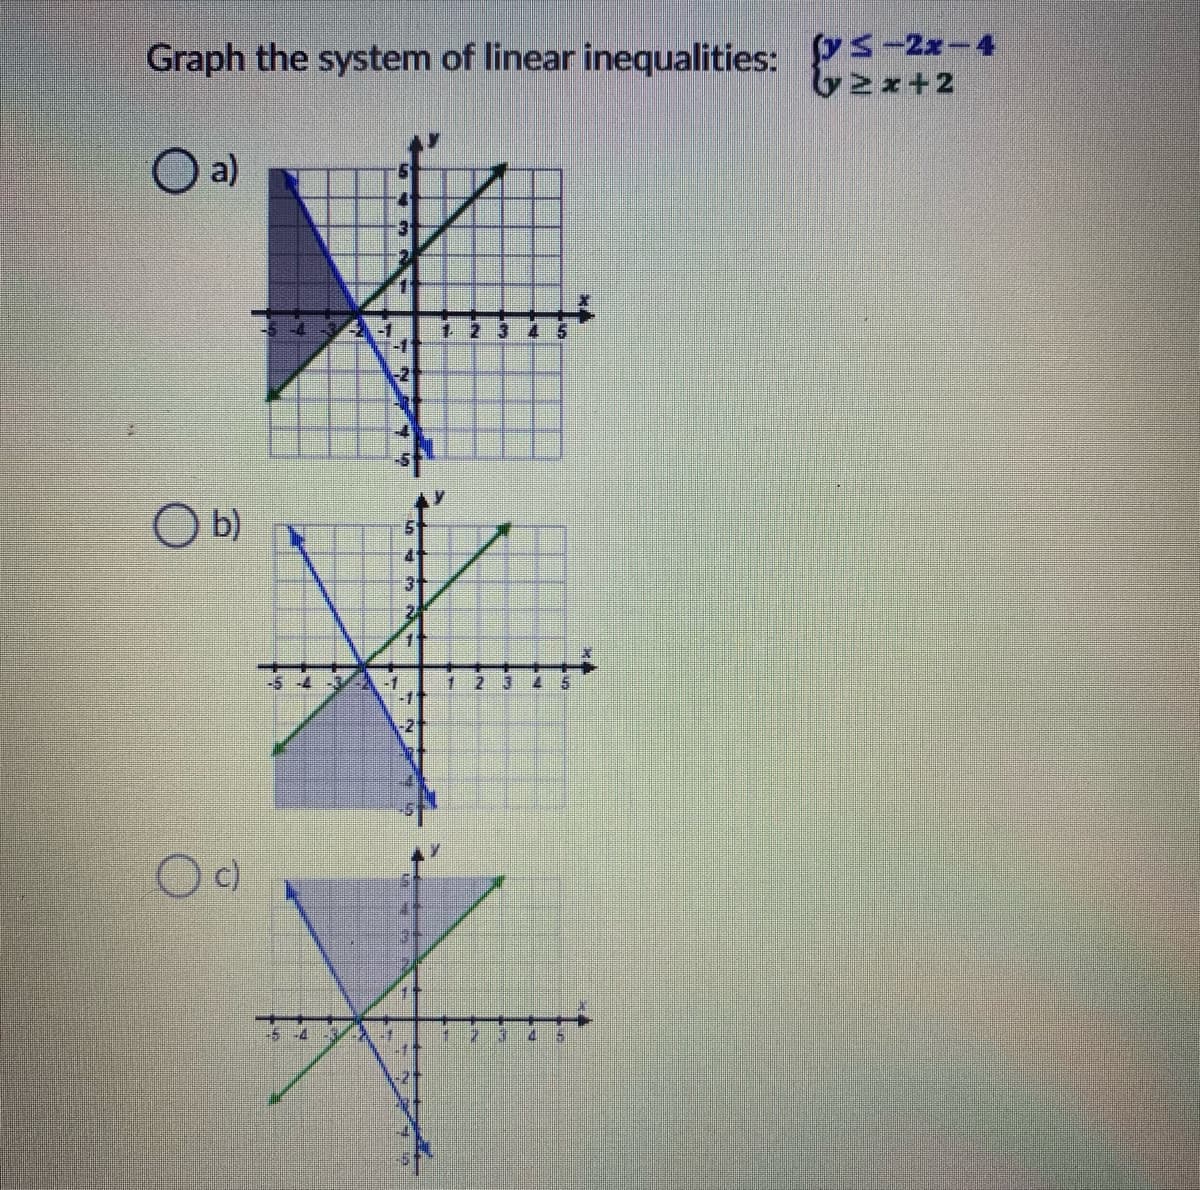 Graph the system of linear inequalities:
fys-2x-4
a)
41
31
-1
-1
-2
b)
31
-1
-1
-21
-5.4
